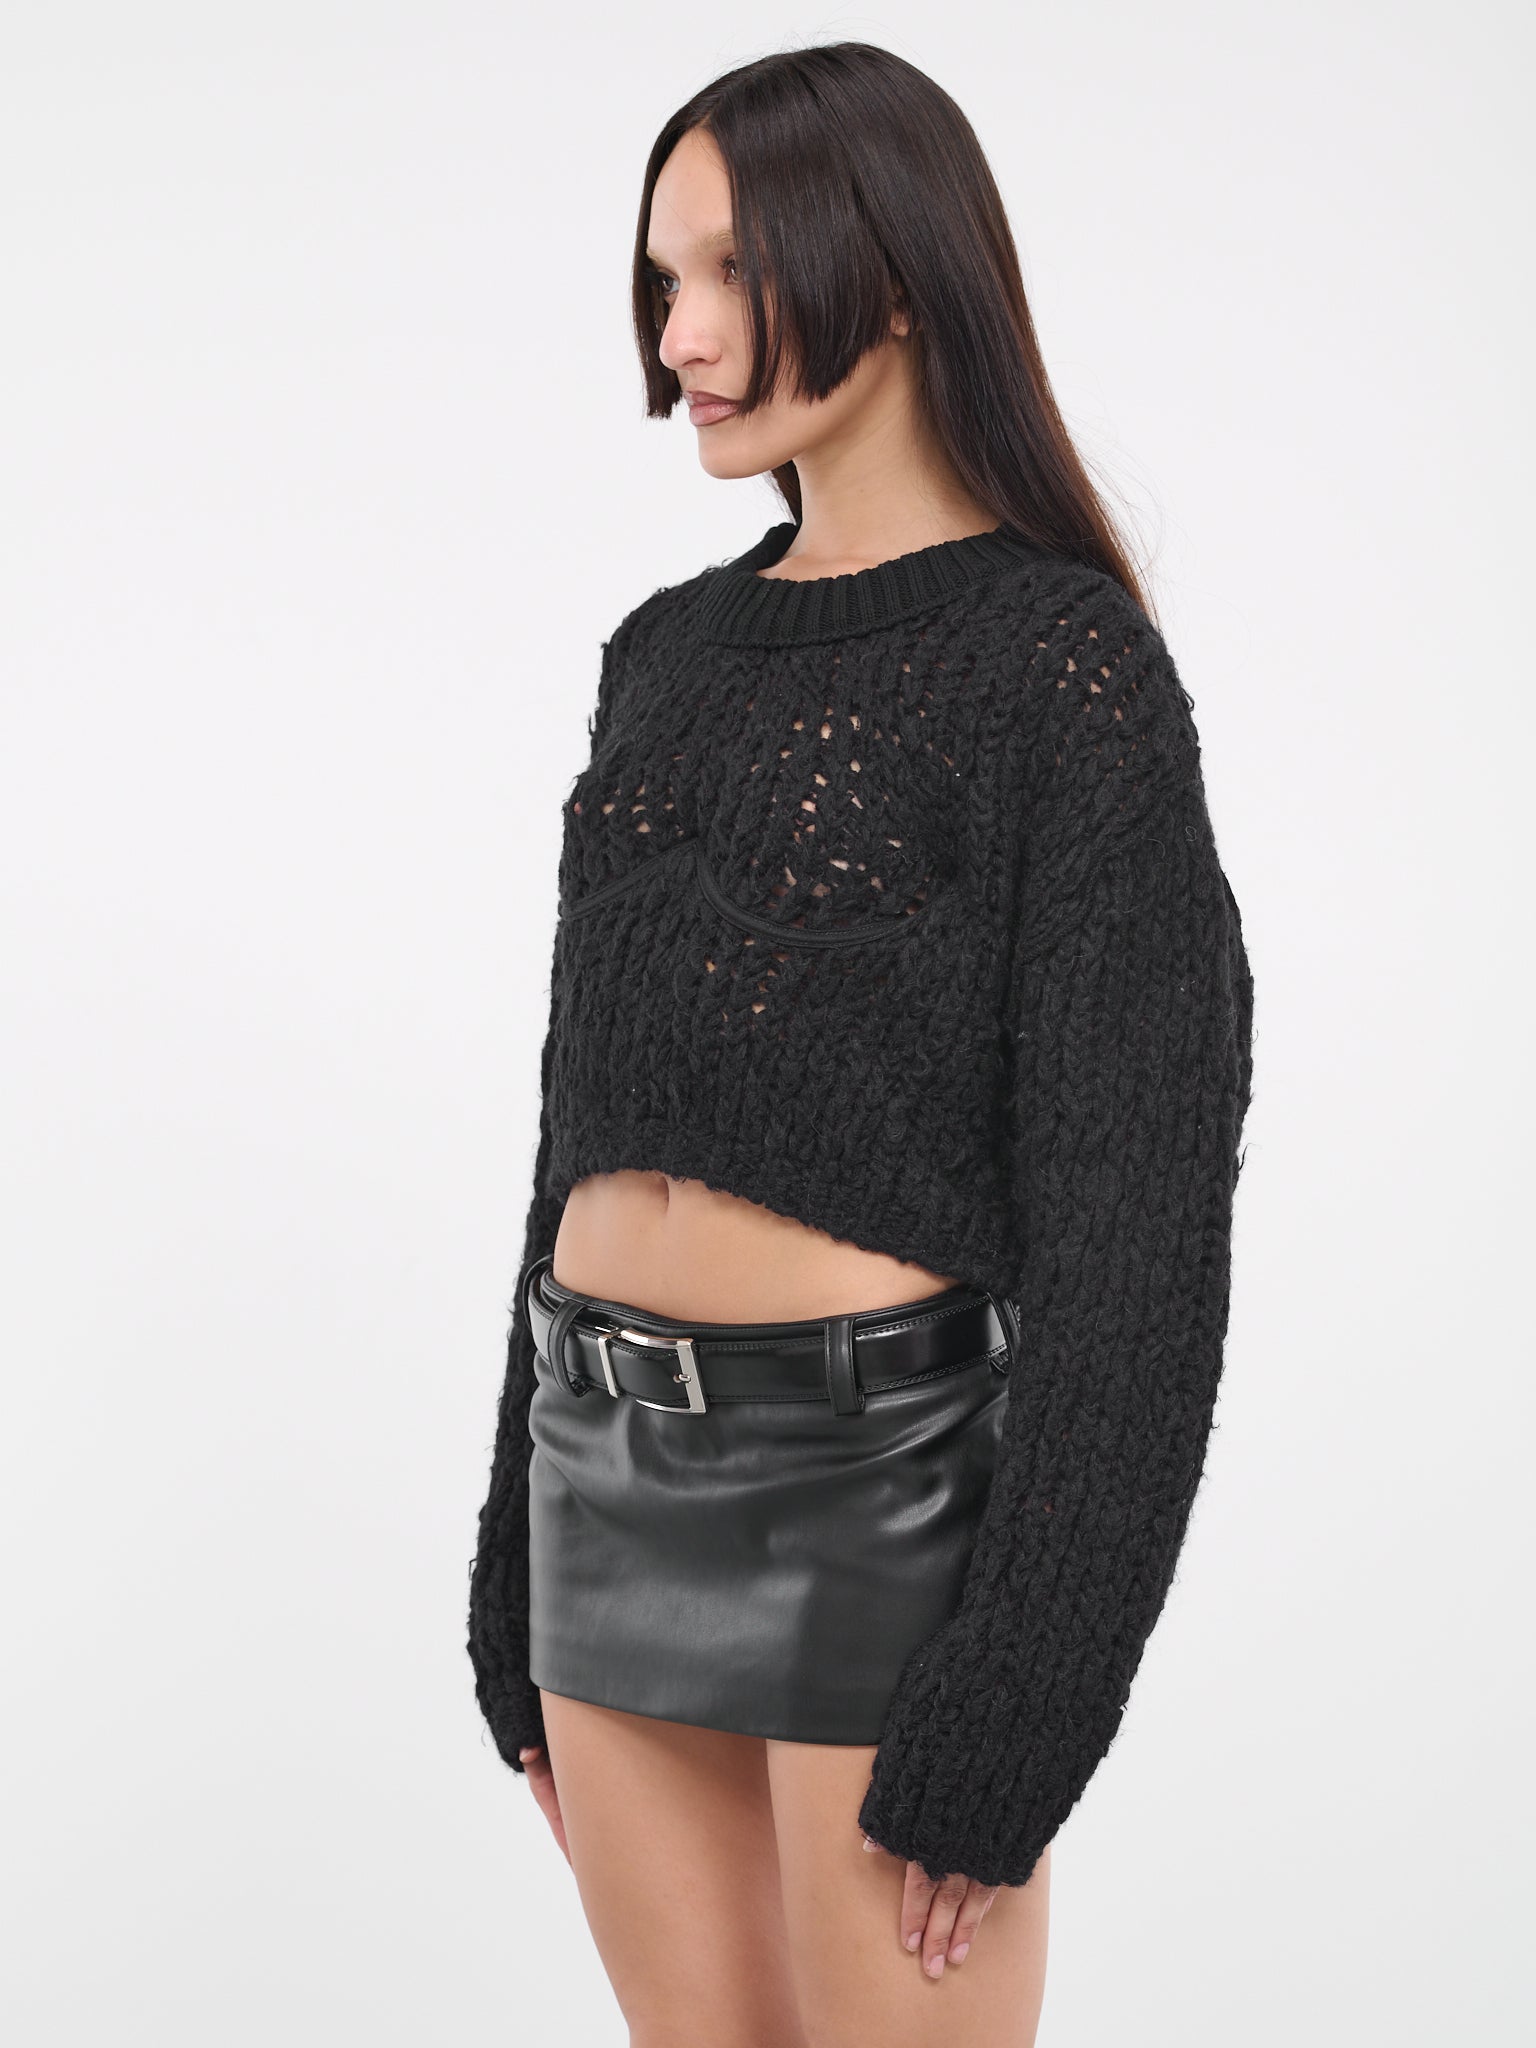 Cup Knit Sweater (VEPX75016A-BLACK)